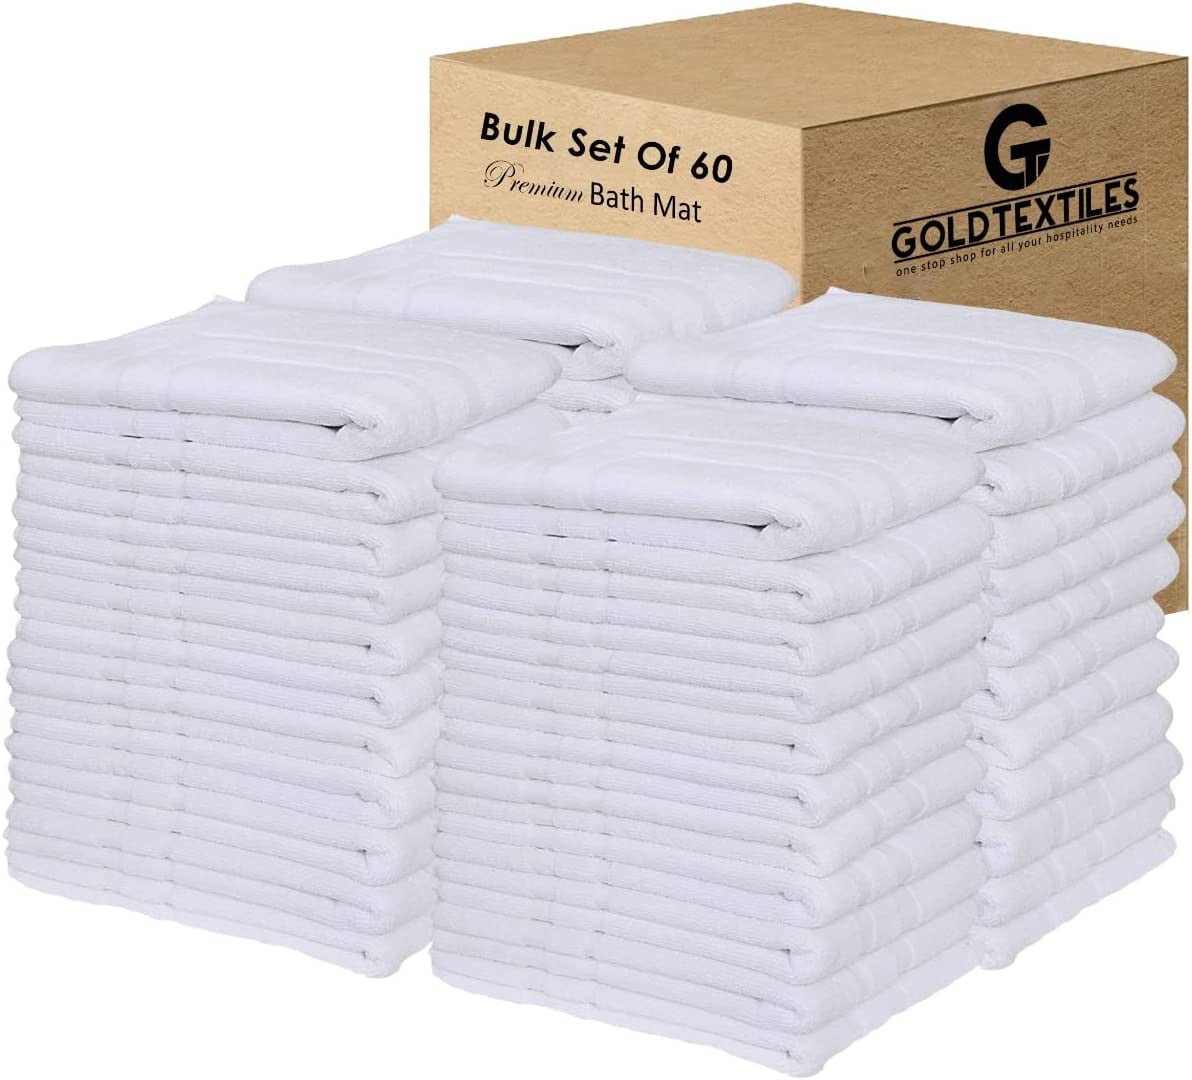 GOLD TEXTILES 120 PCS White Bath Towels Bulk (24x50 Inches) - Light Weight  Easy-Care Commercial Grade (120)